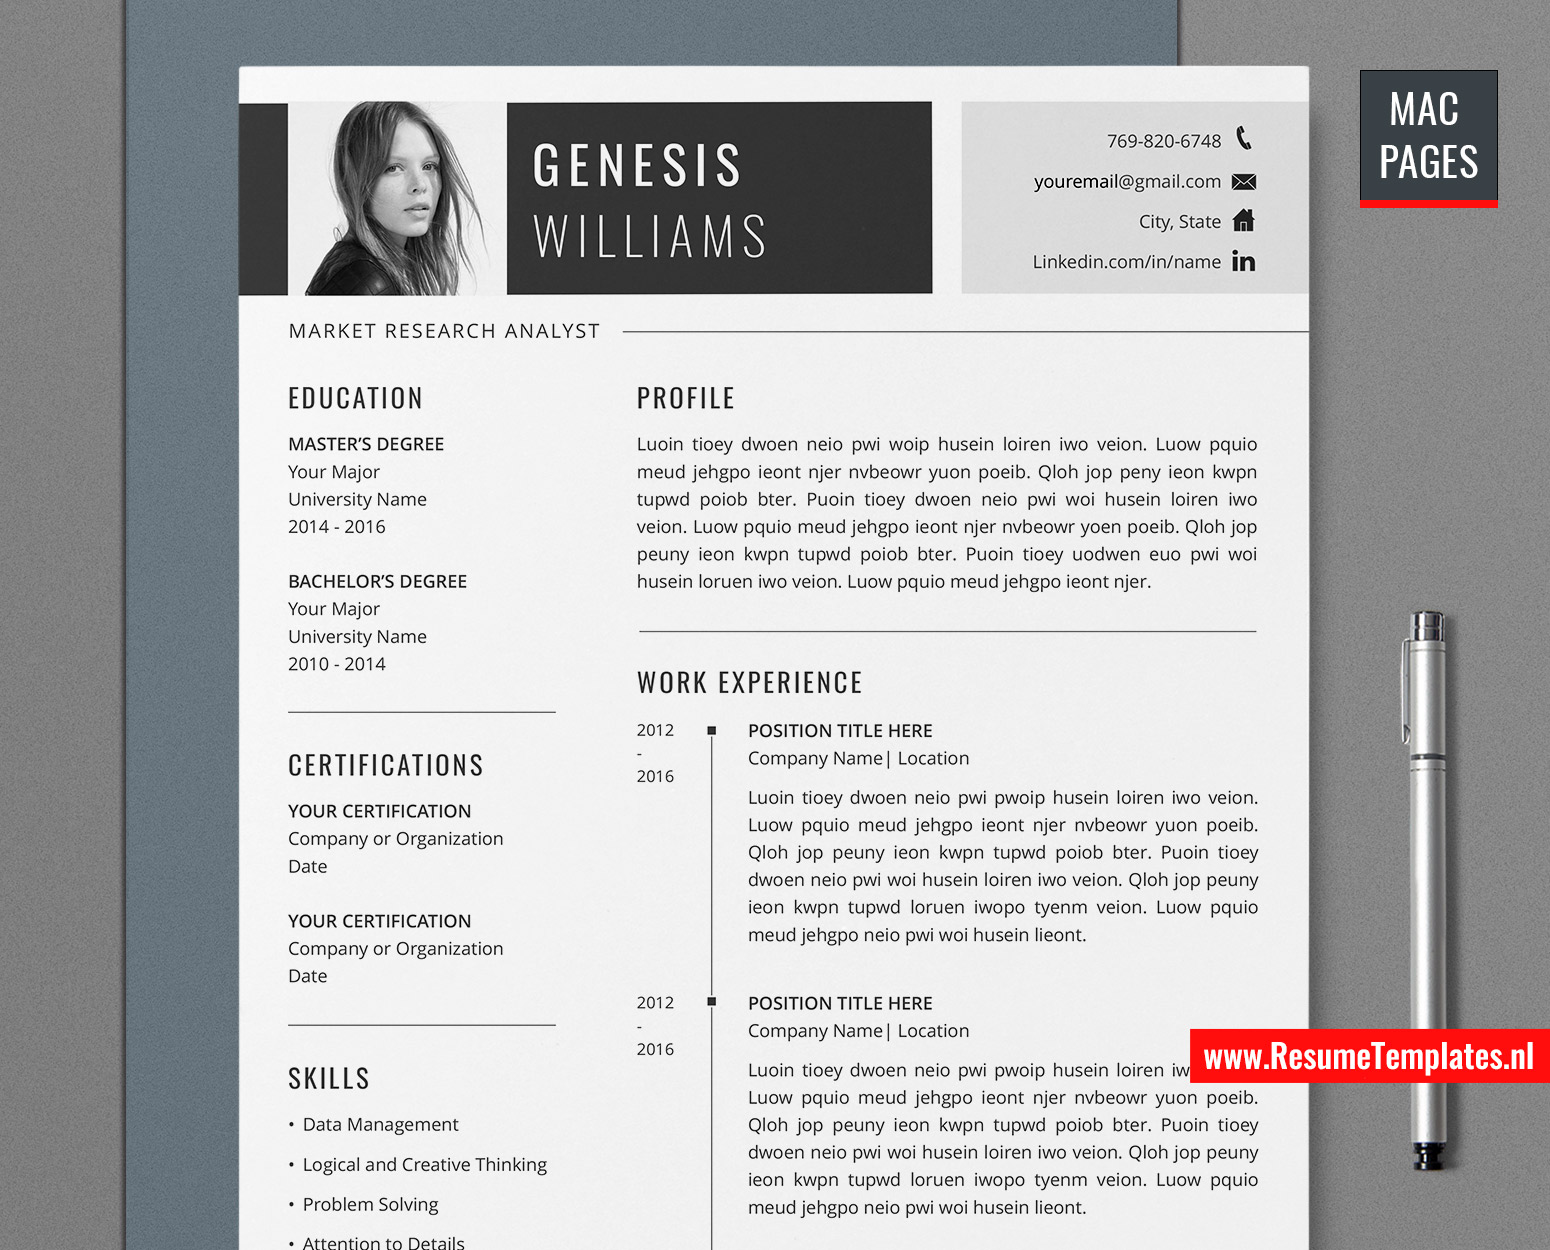 for-mac-pages-professional-resume-template-cv-template-for-mac-pages-cover-letter